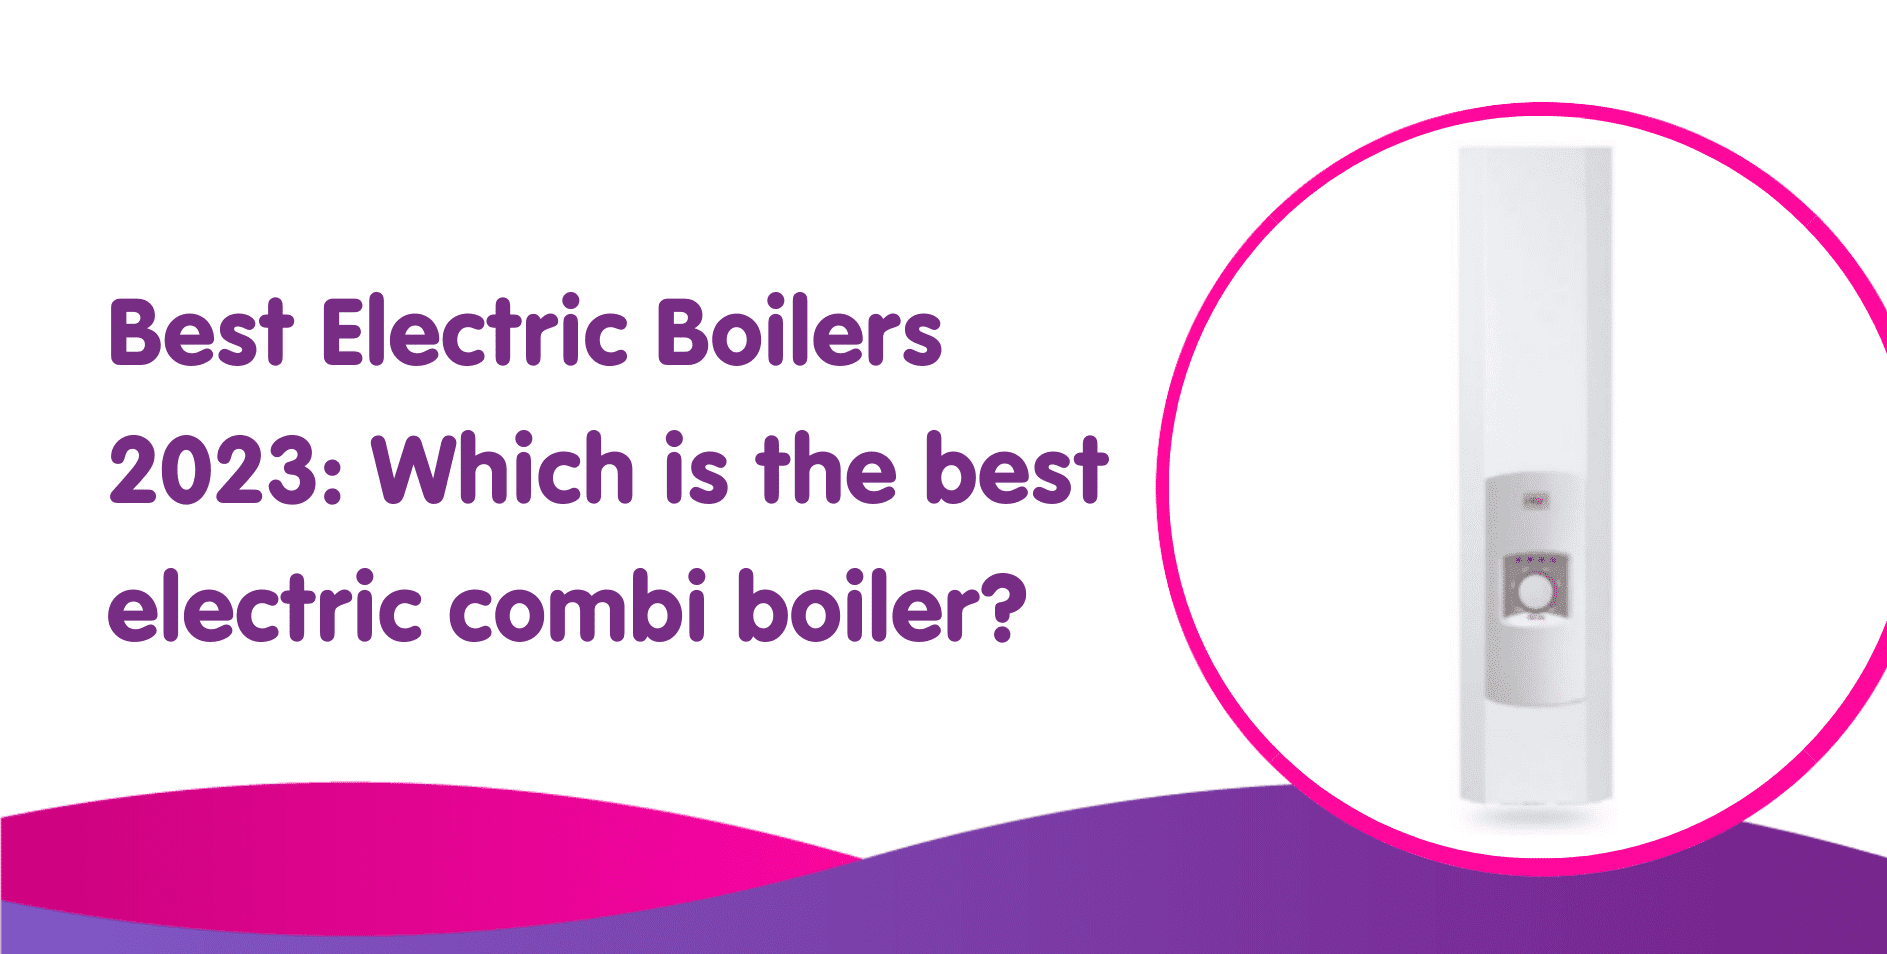 Best Electric Boilers 2023: Which is the best electric combi boiler